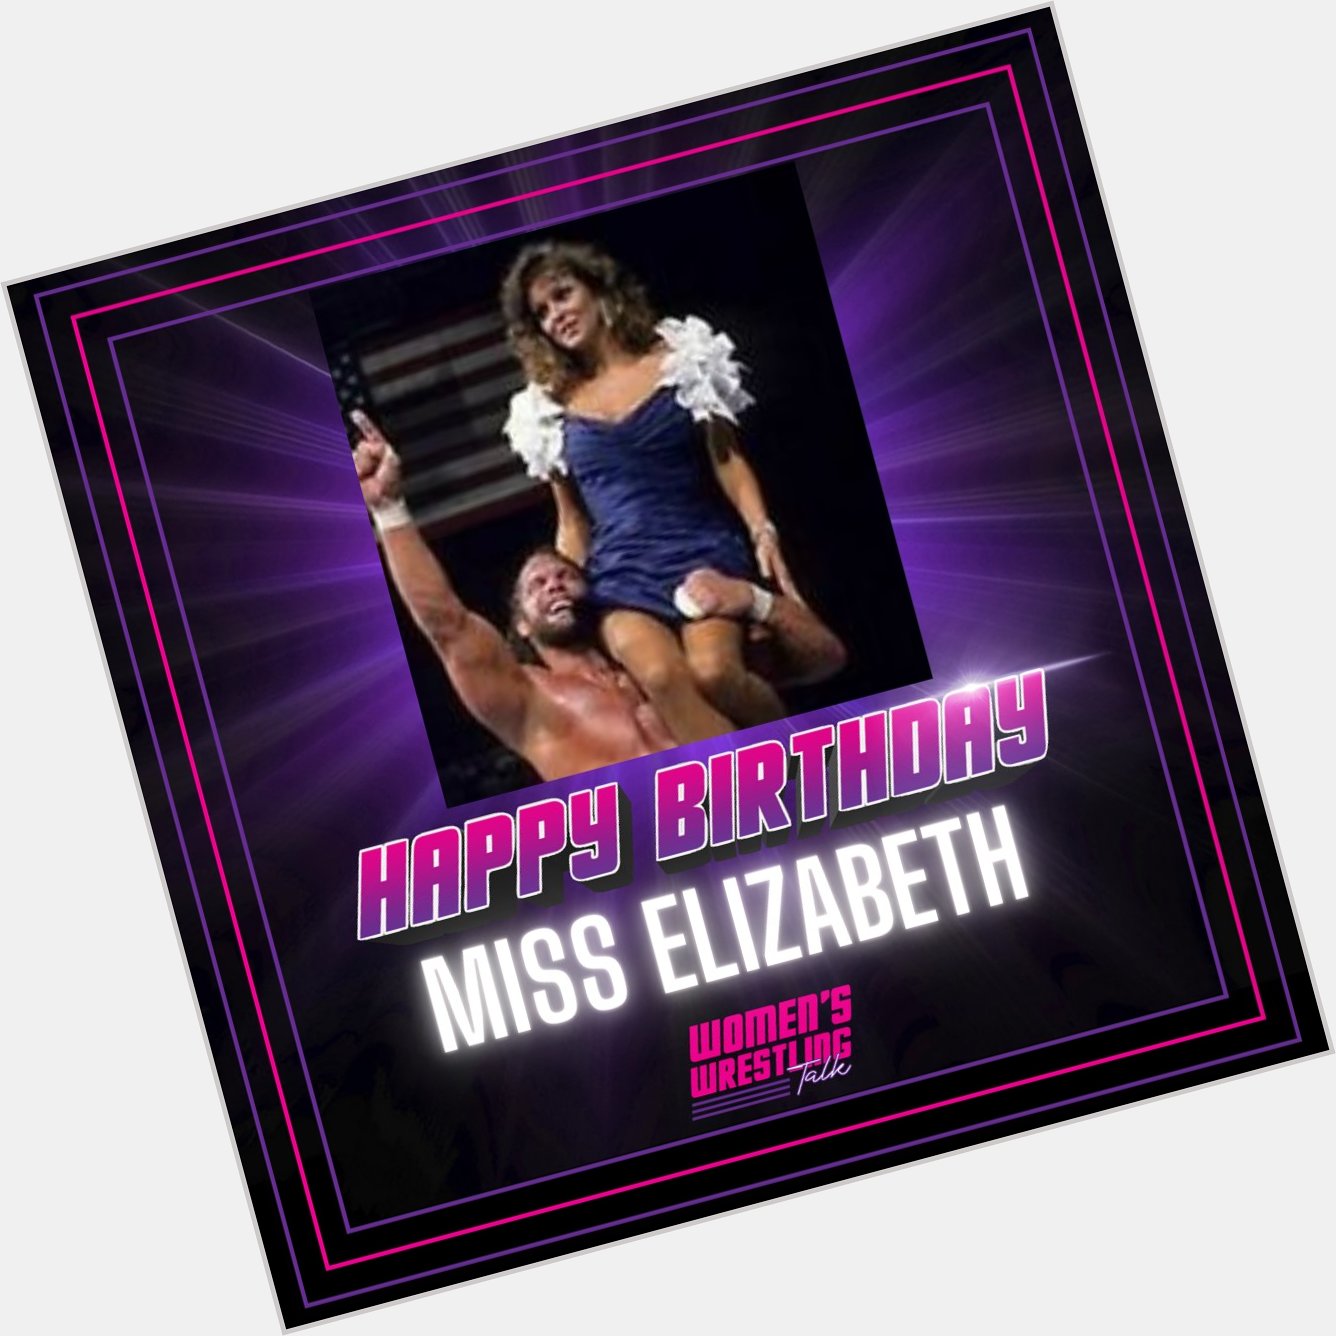 Happy heavenly Birthday to Miss Elizabeth! What was your favorite moment in pro wrestling? 